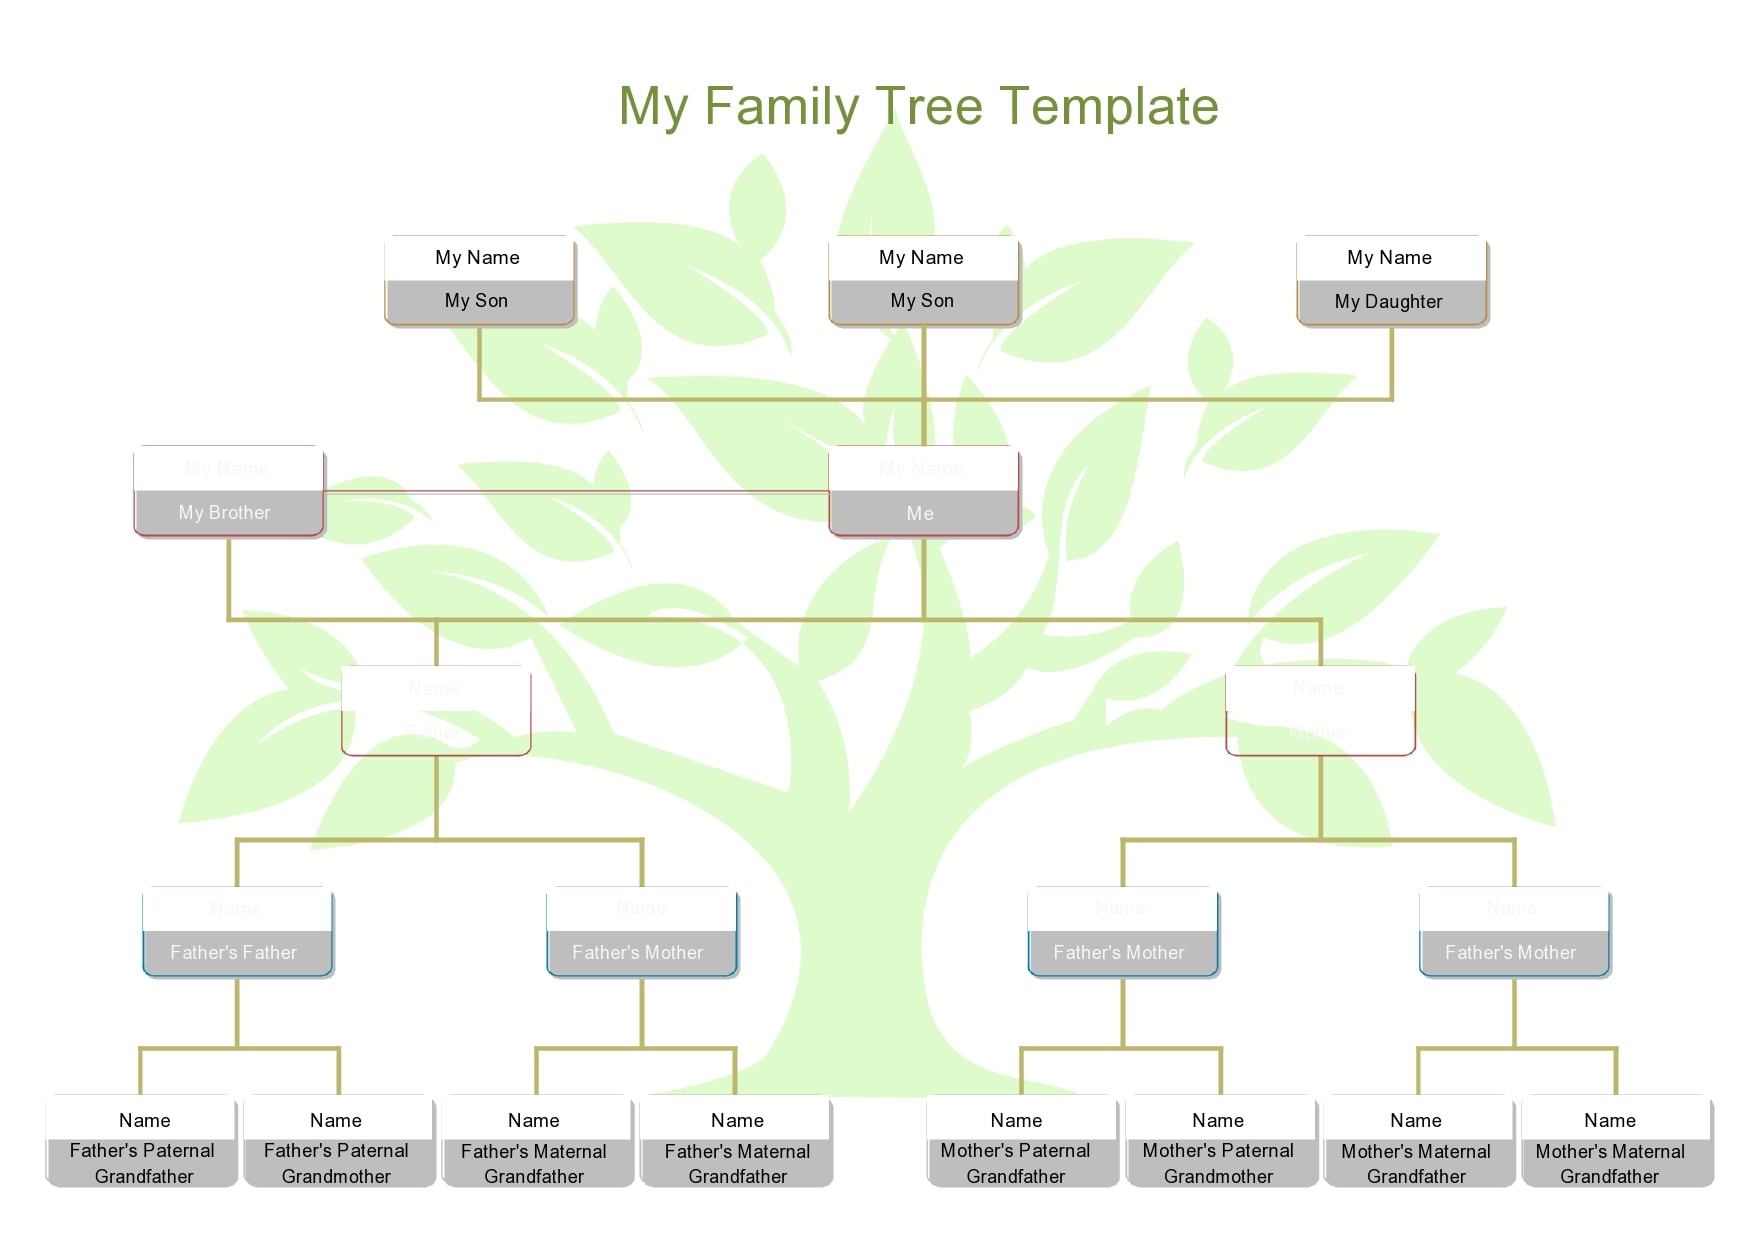 Free Family Tree Templates For A Projects Free Family Tree Templates Online Family Tree Maker